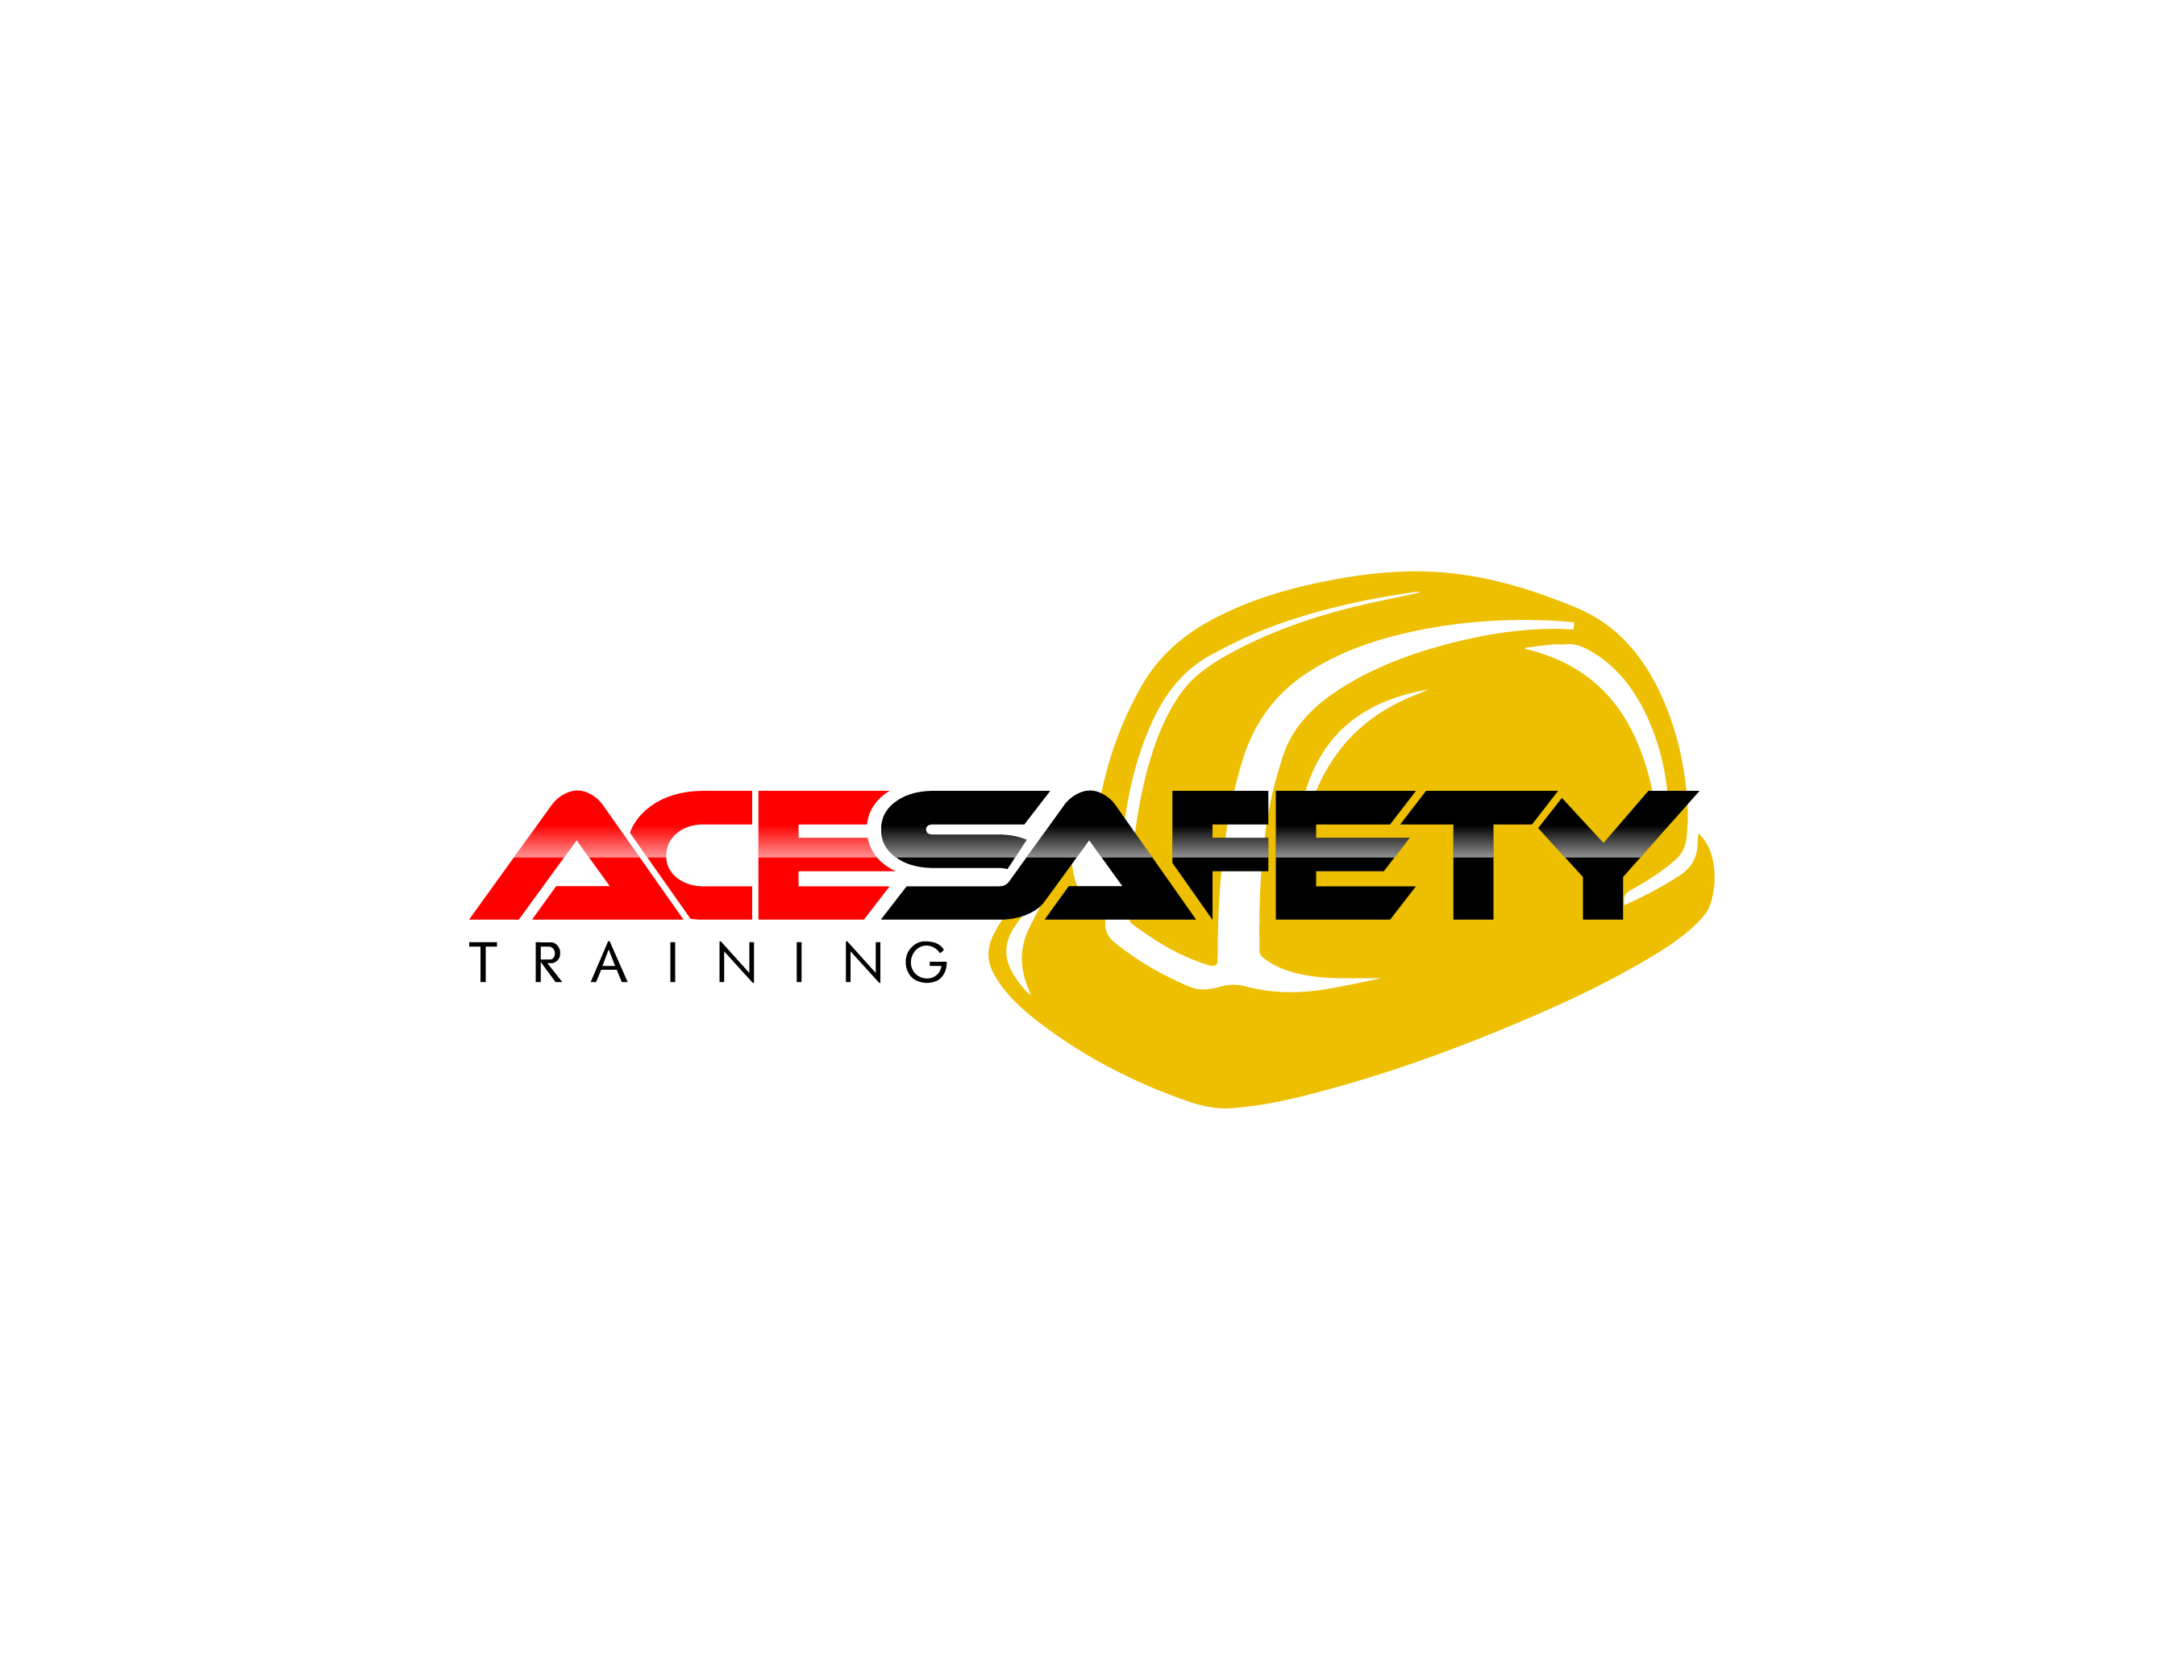 Online scheduler for Ace Safety Training in Las Vegas, NV